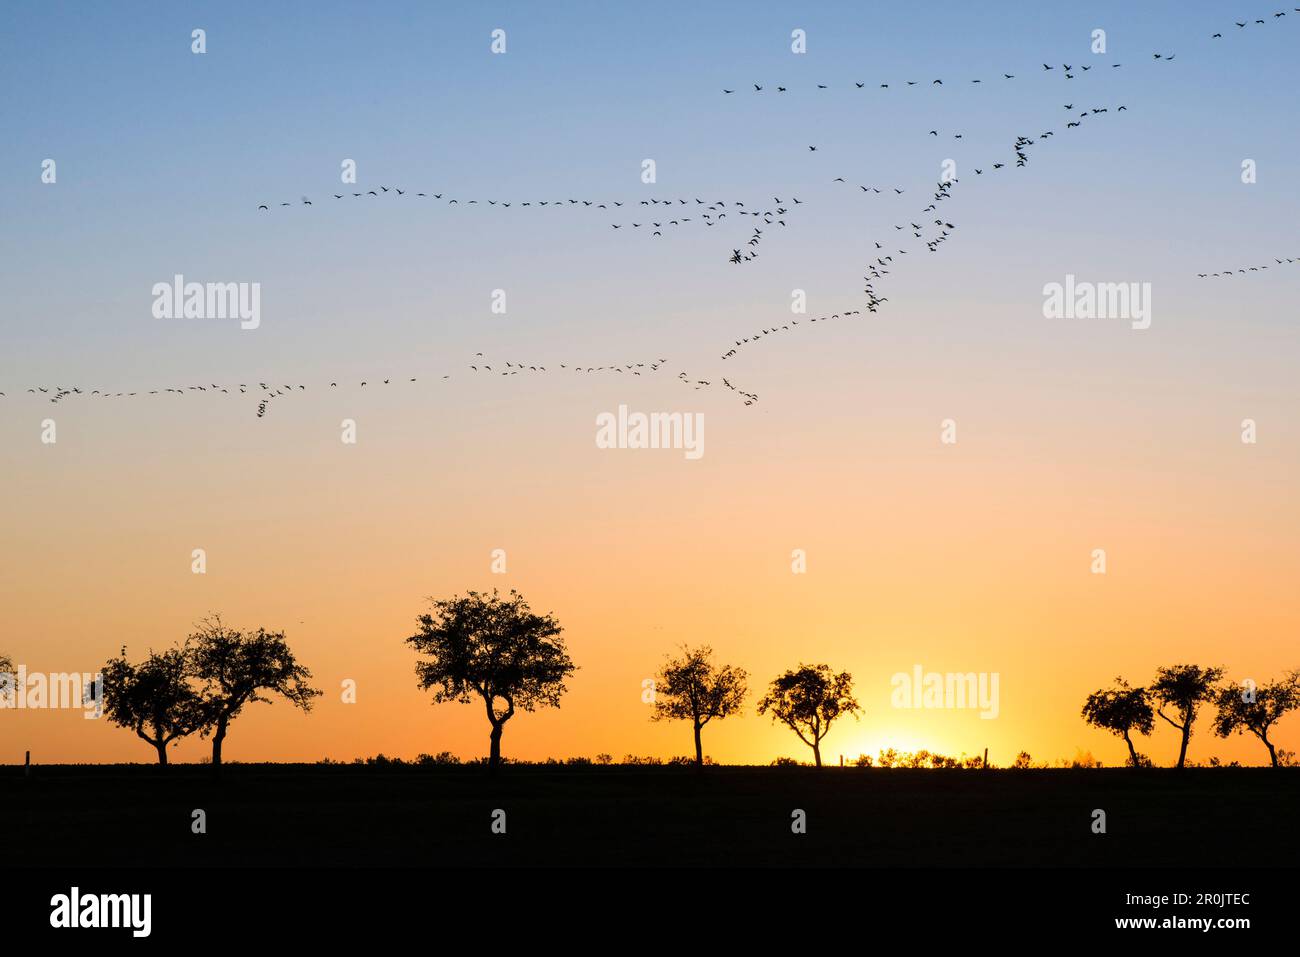 Silhouettes of cranes in formation flight in the red-colored sky of the setting sun. In the foreground silhouettes of many leafless trees in autumn, o Stock Photo